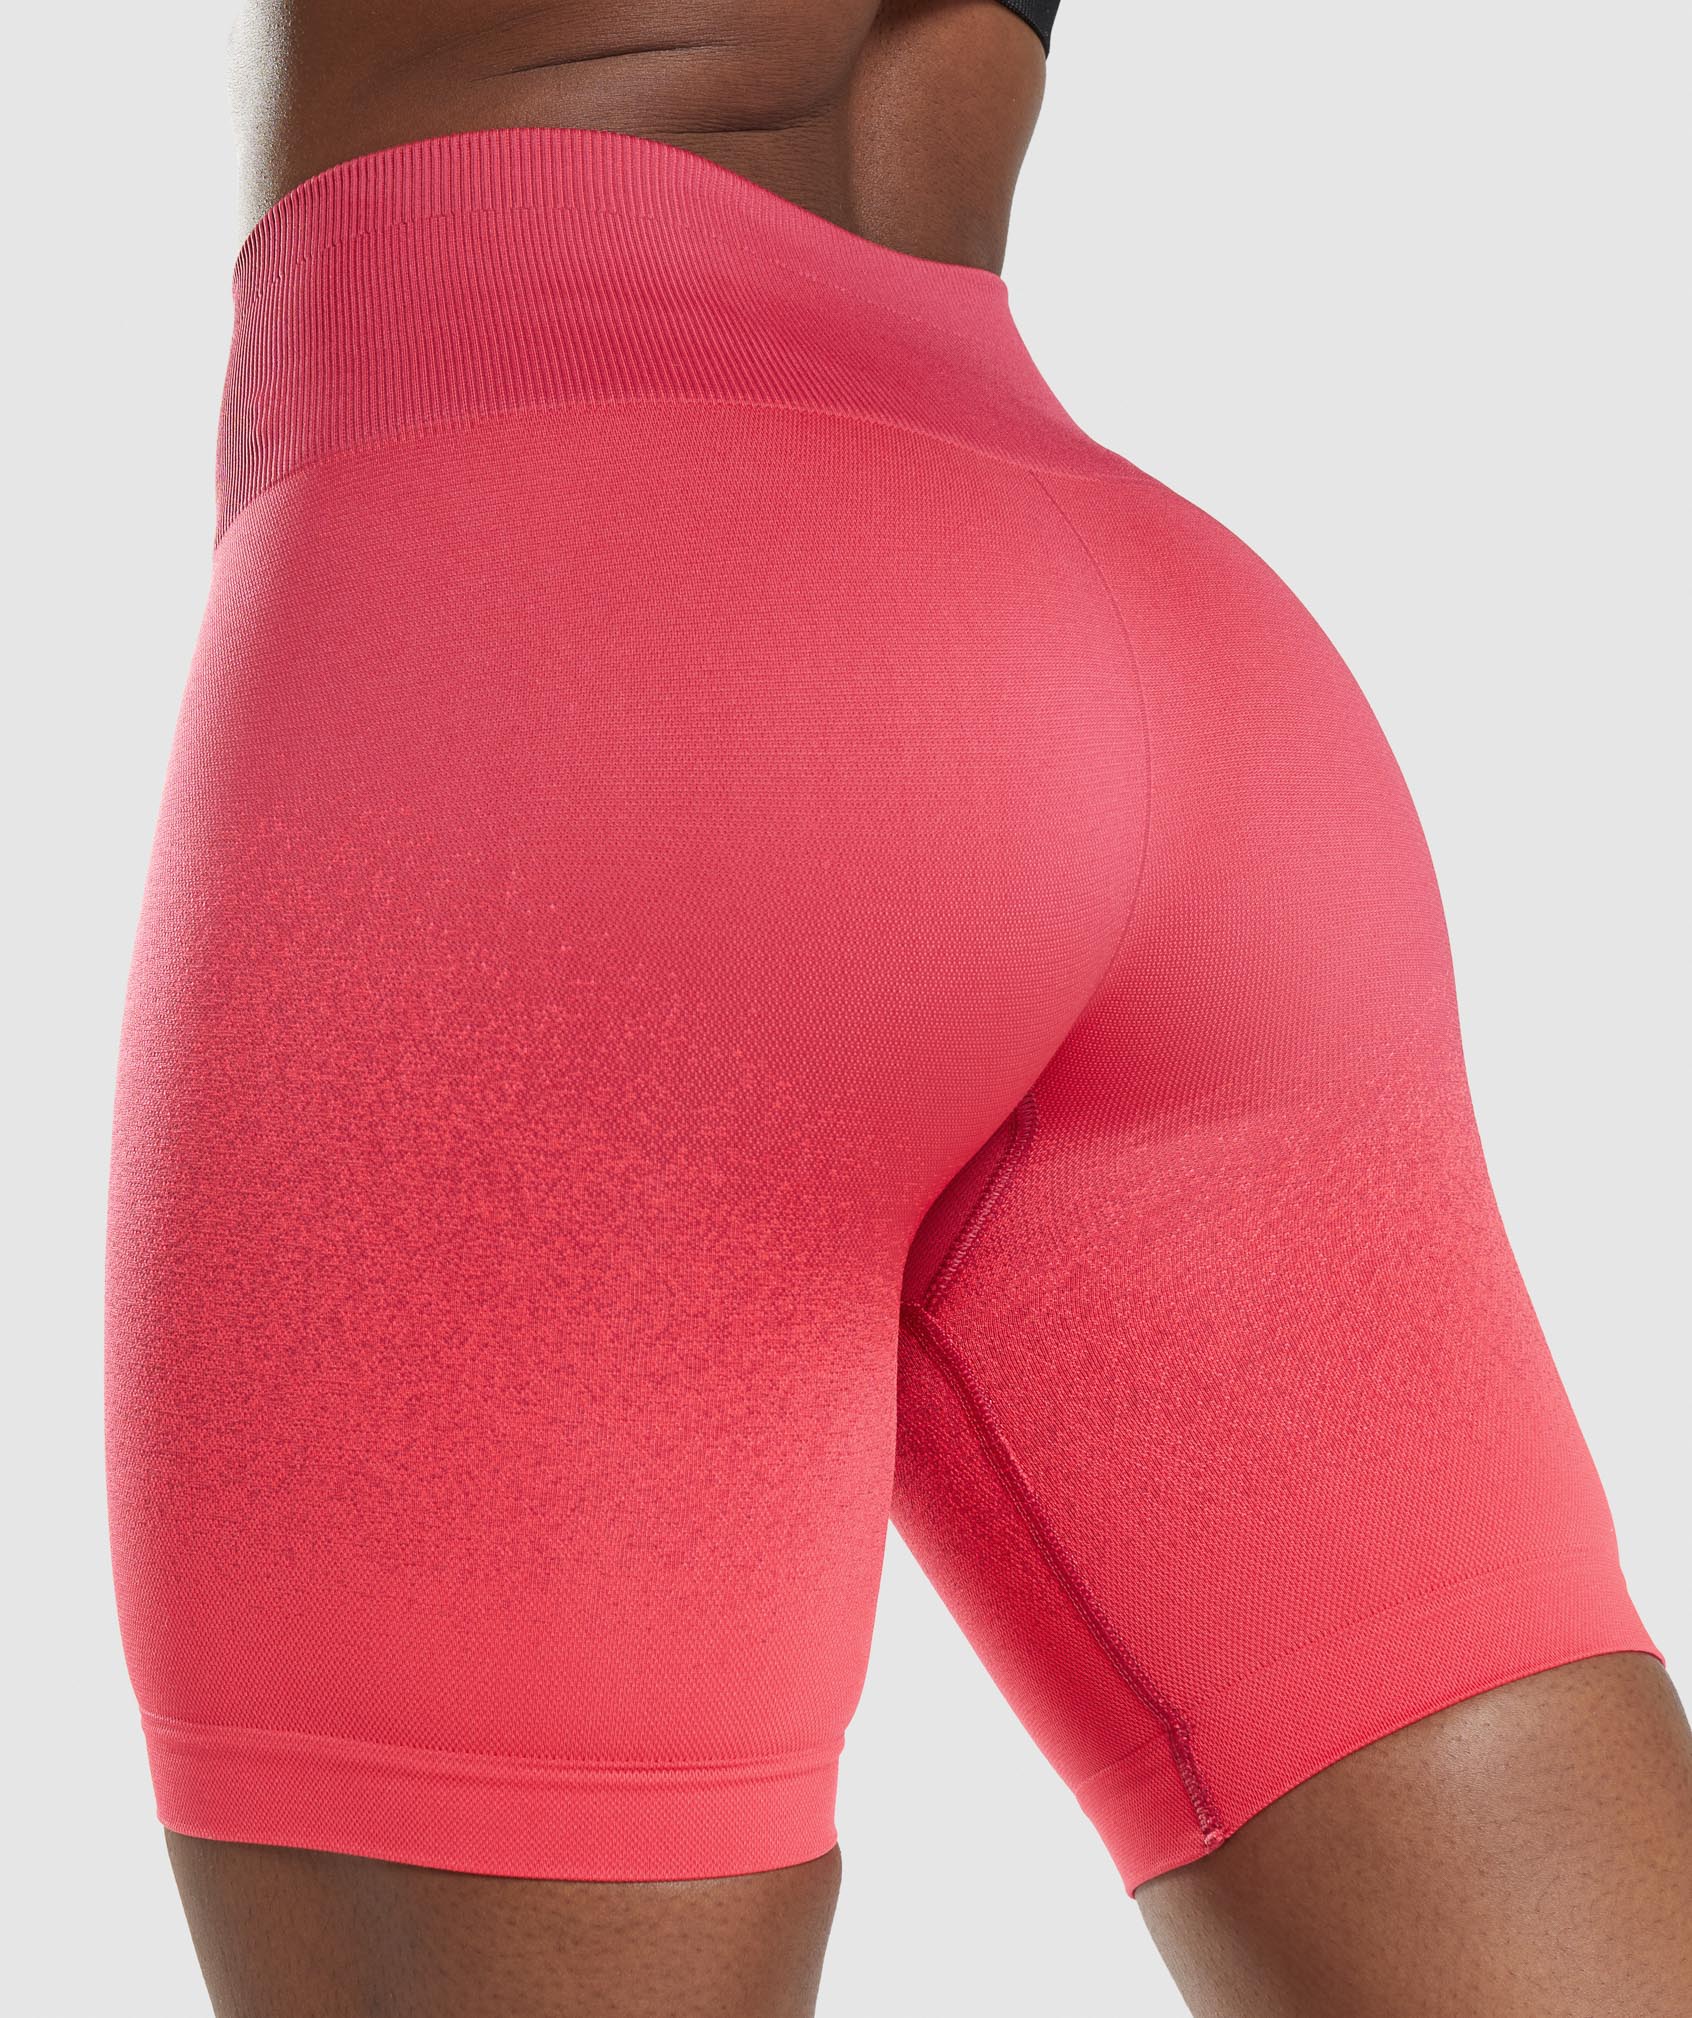 WTF?! AGAIN? New Gymshark Ombre Seamless